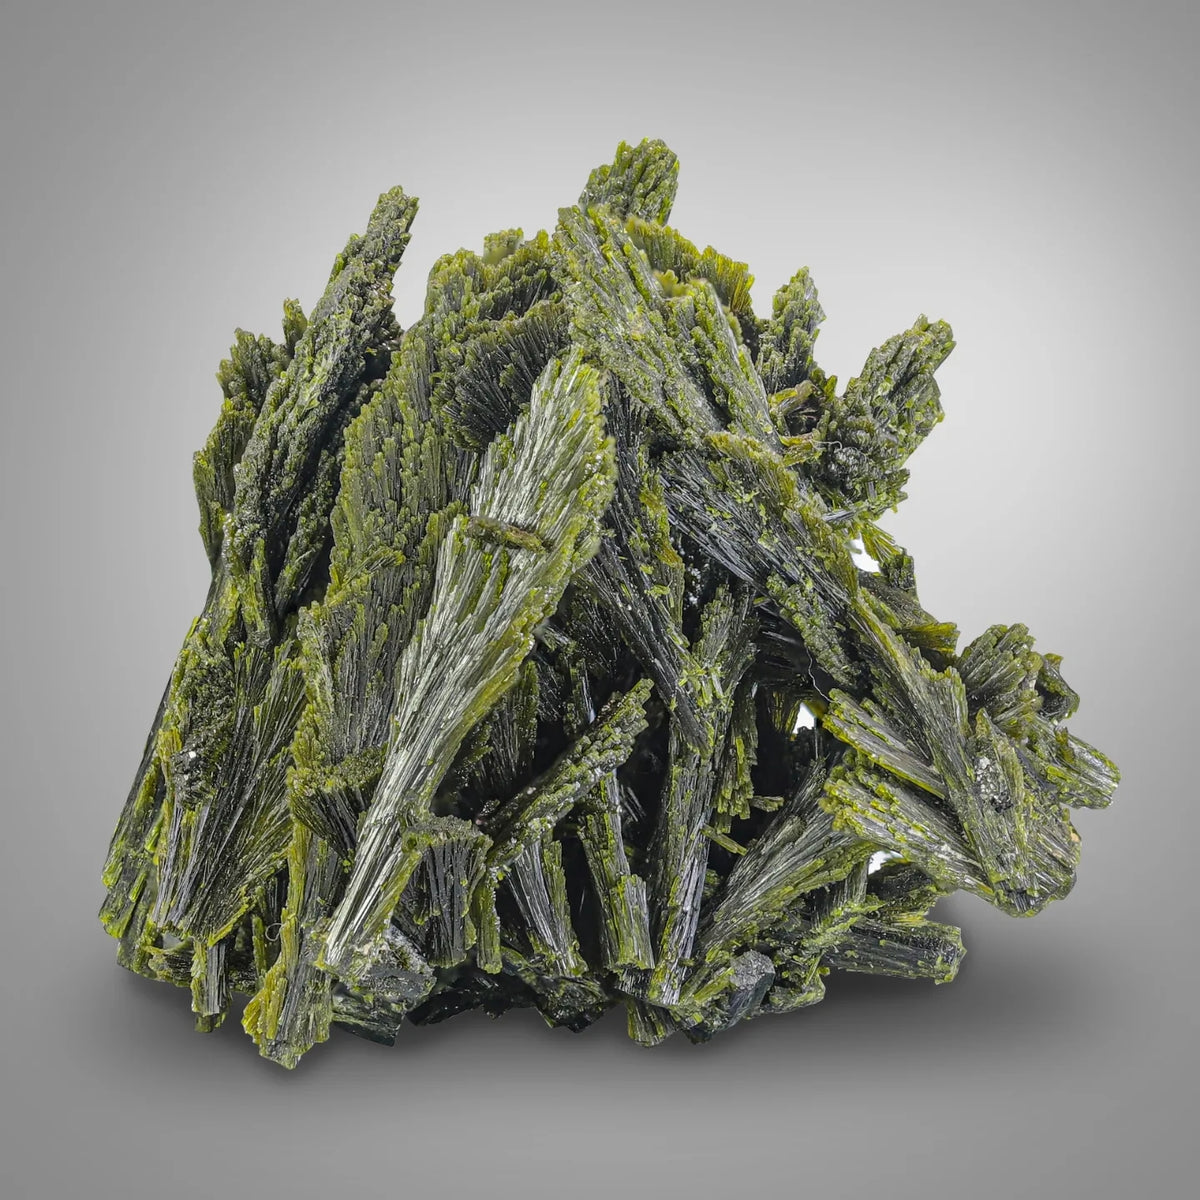 Strangled Forest Green Epidote Crystal Aggregate Matrix from Pakistan